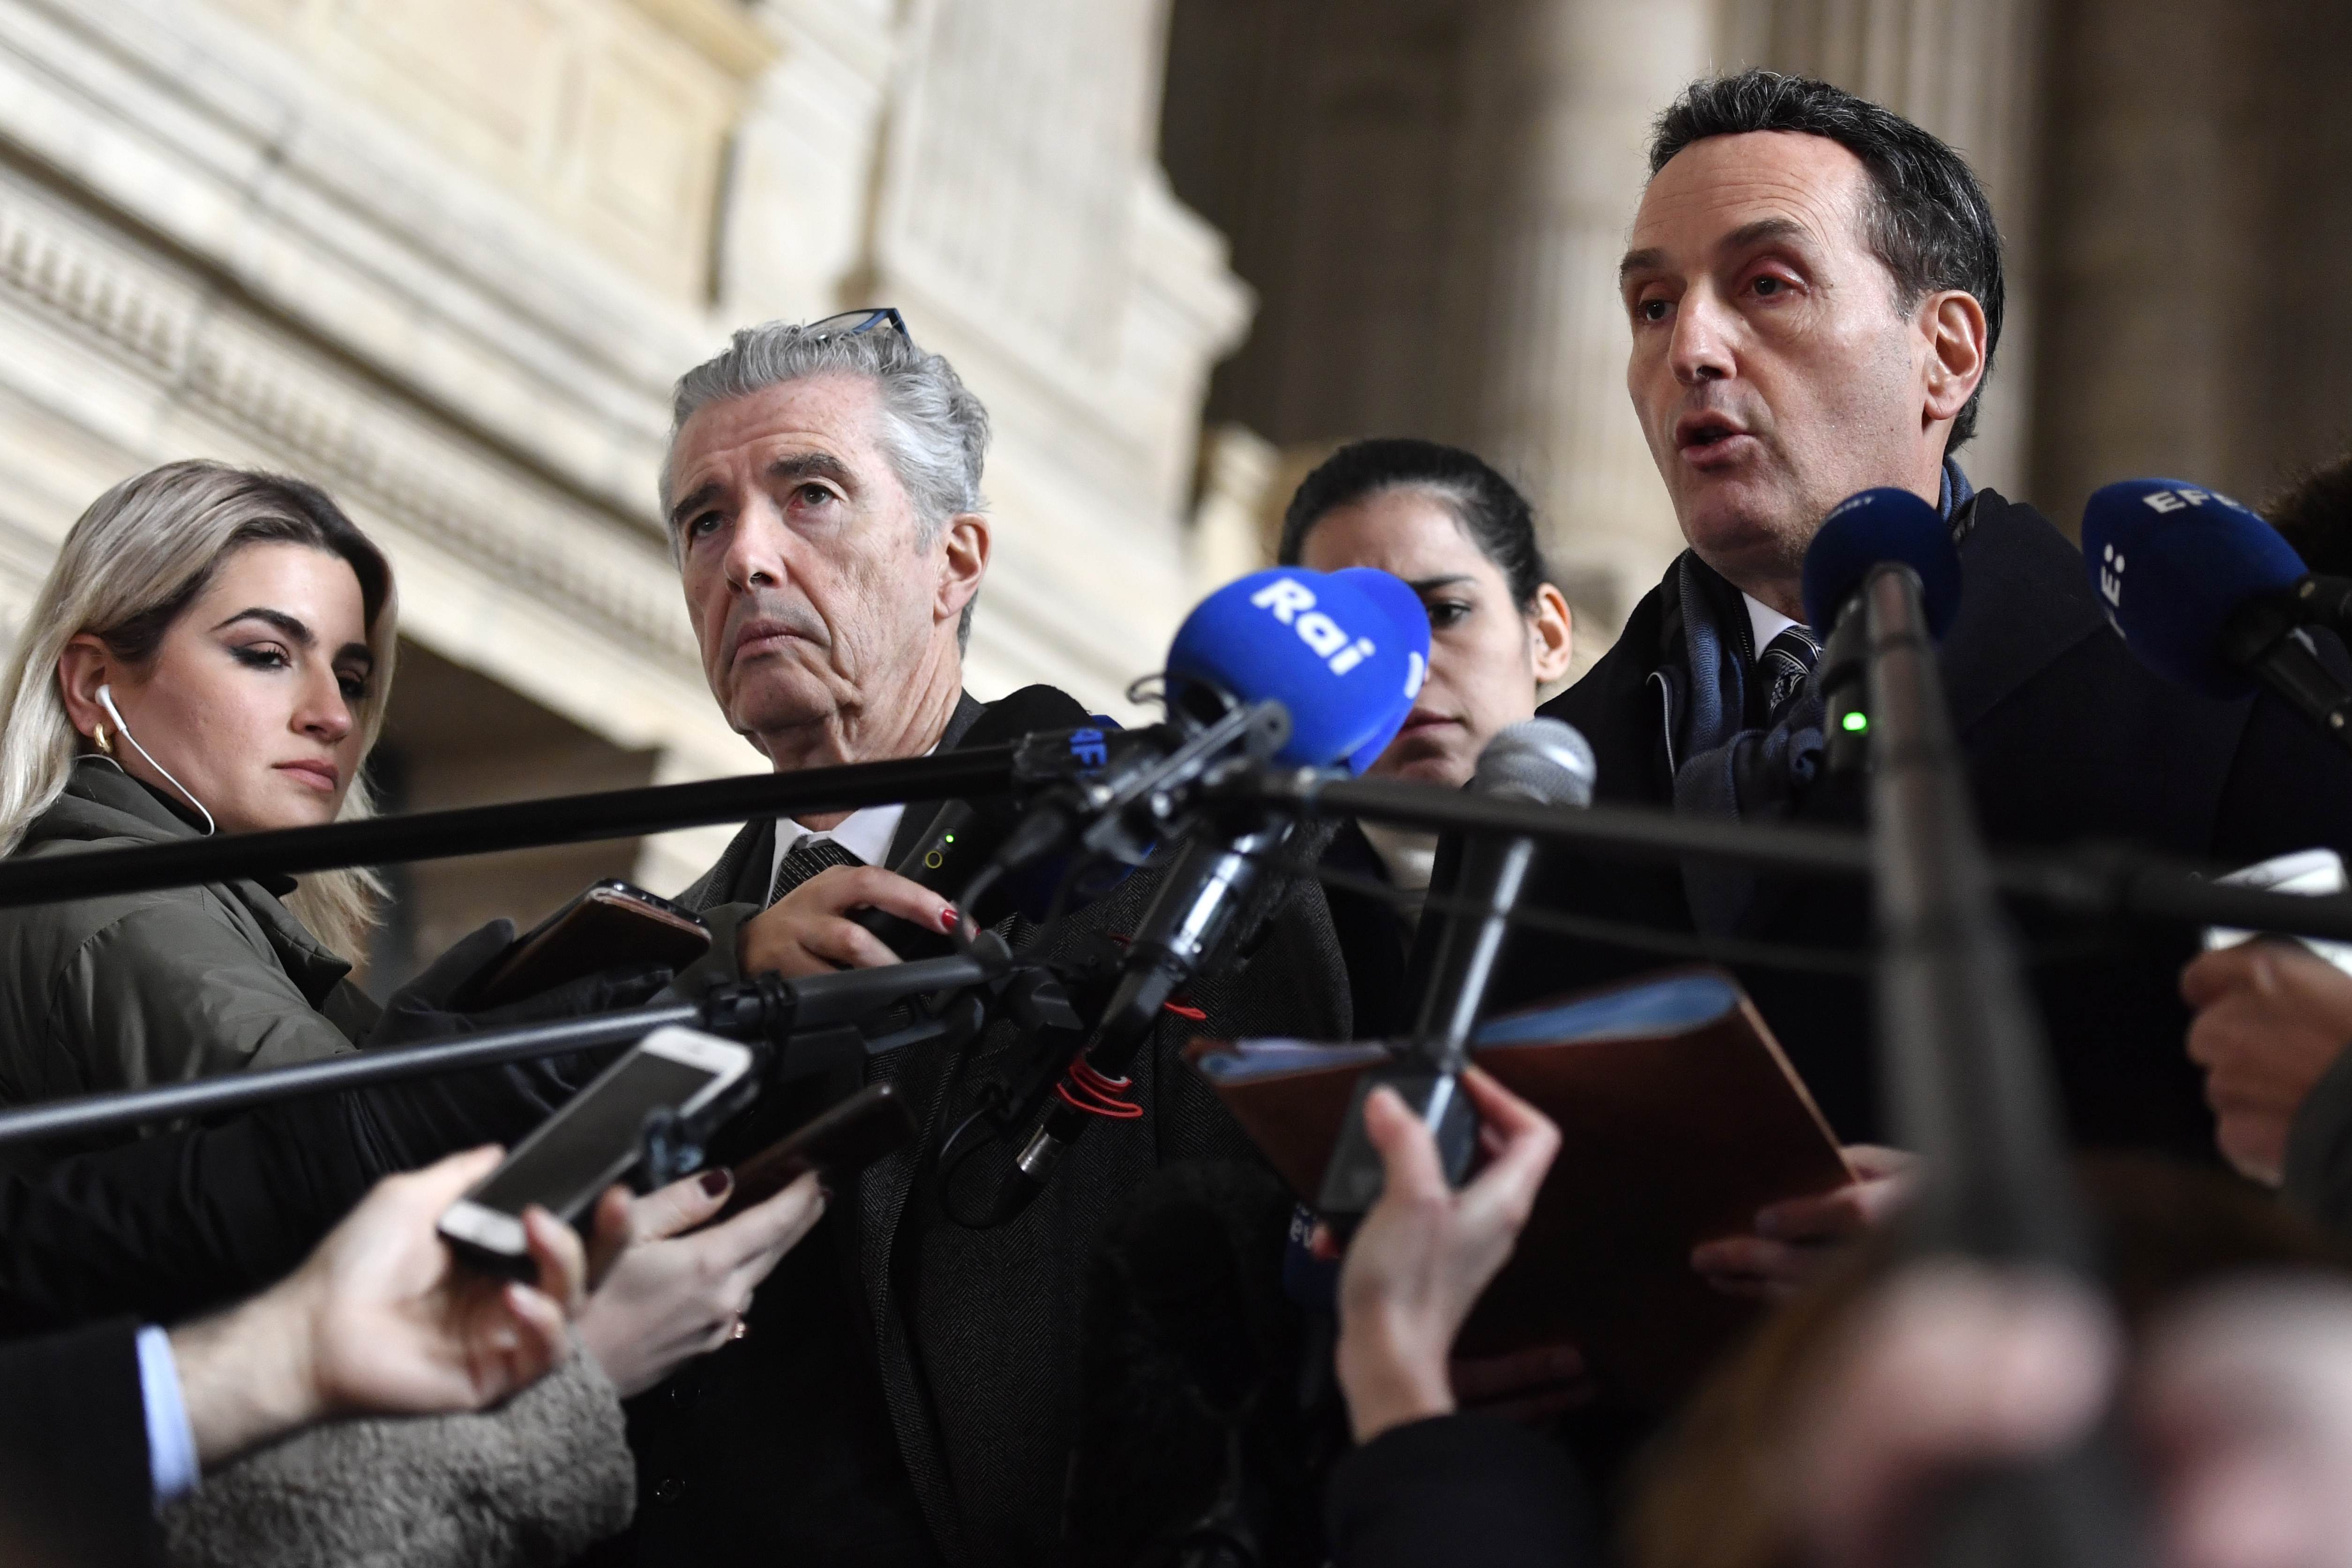 European lawmaker Eva Kaili's lawyer, Andre Risopolous, second left, speaks to the media after a hearing at the Palace of Justice in Brussels, Thursday, Jan. 19, 2023. (AP Photo/Geert Vanden Wijngaert )